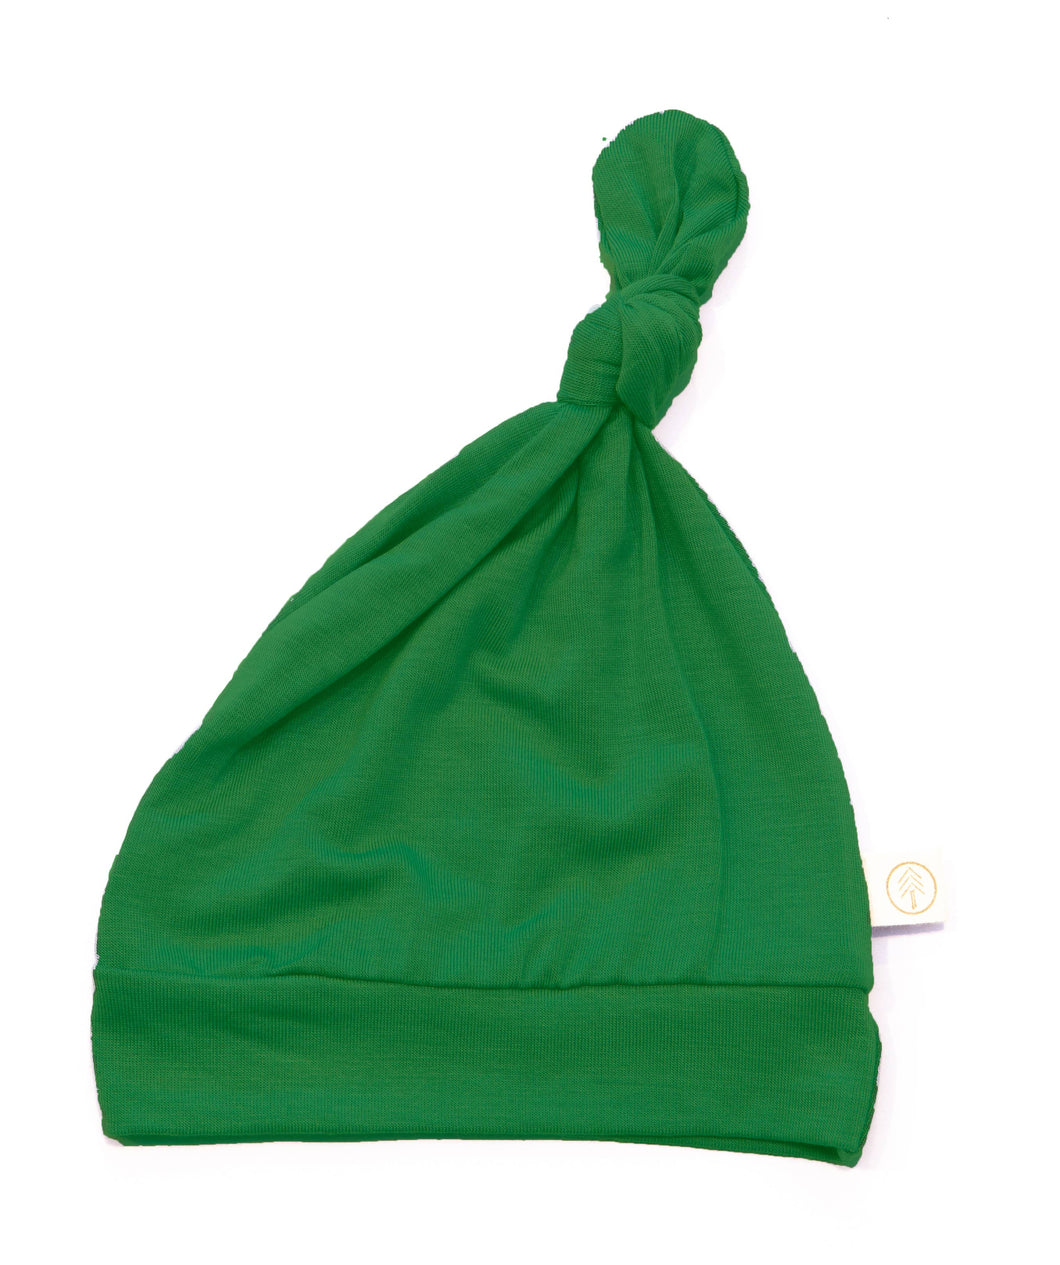 Bamboo Baby Top Knot Hat - Kelly Green - Tenth & Pine